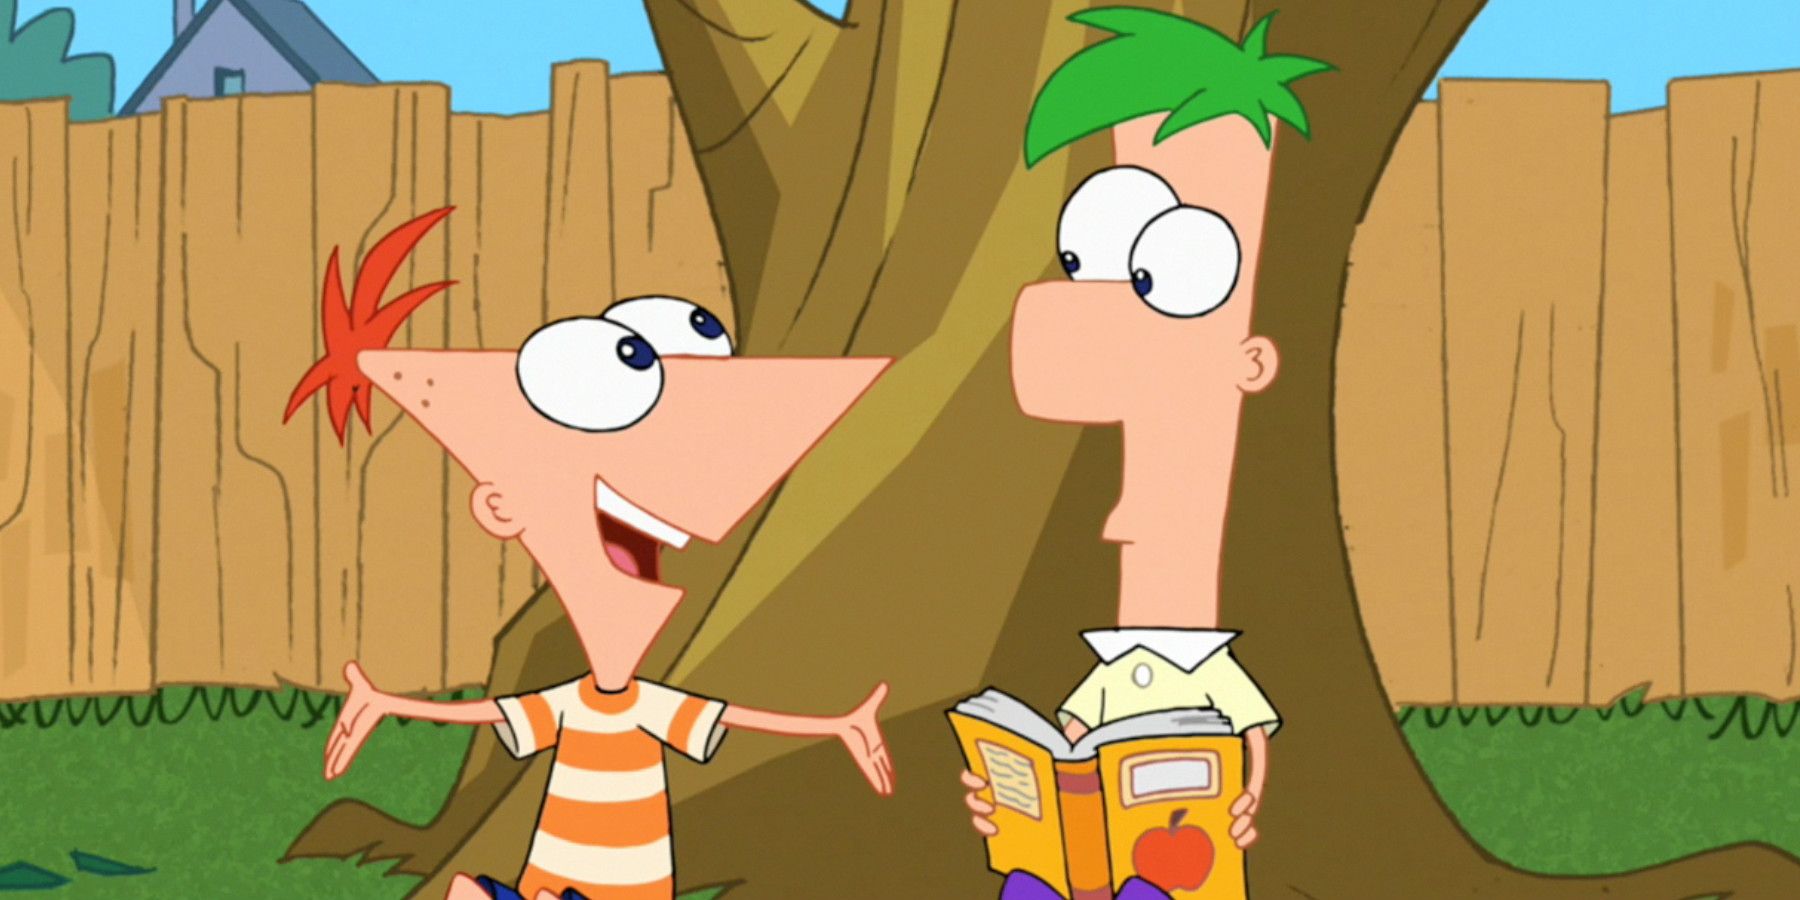 Phineas and Ferb talking in front of a tree